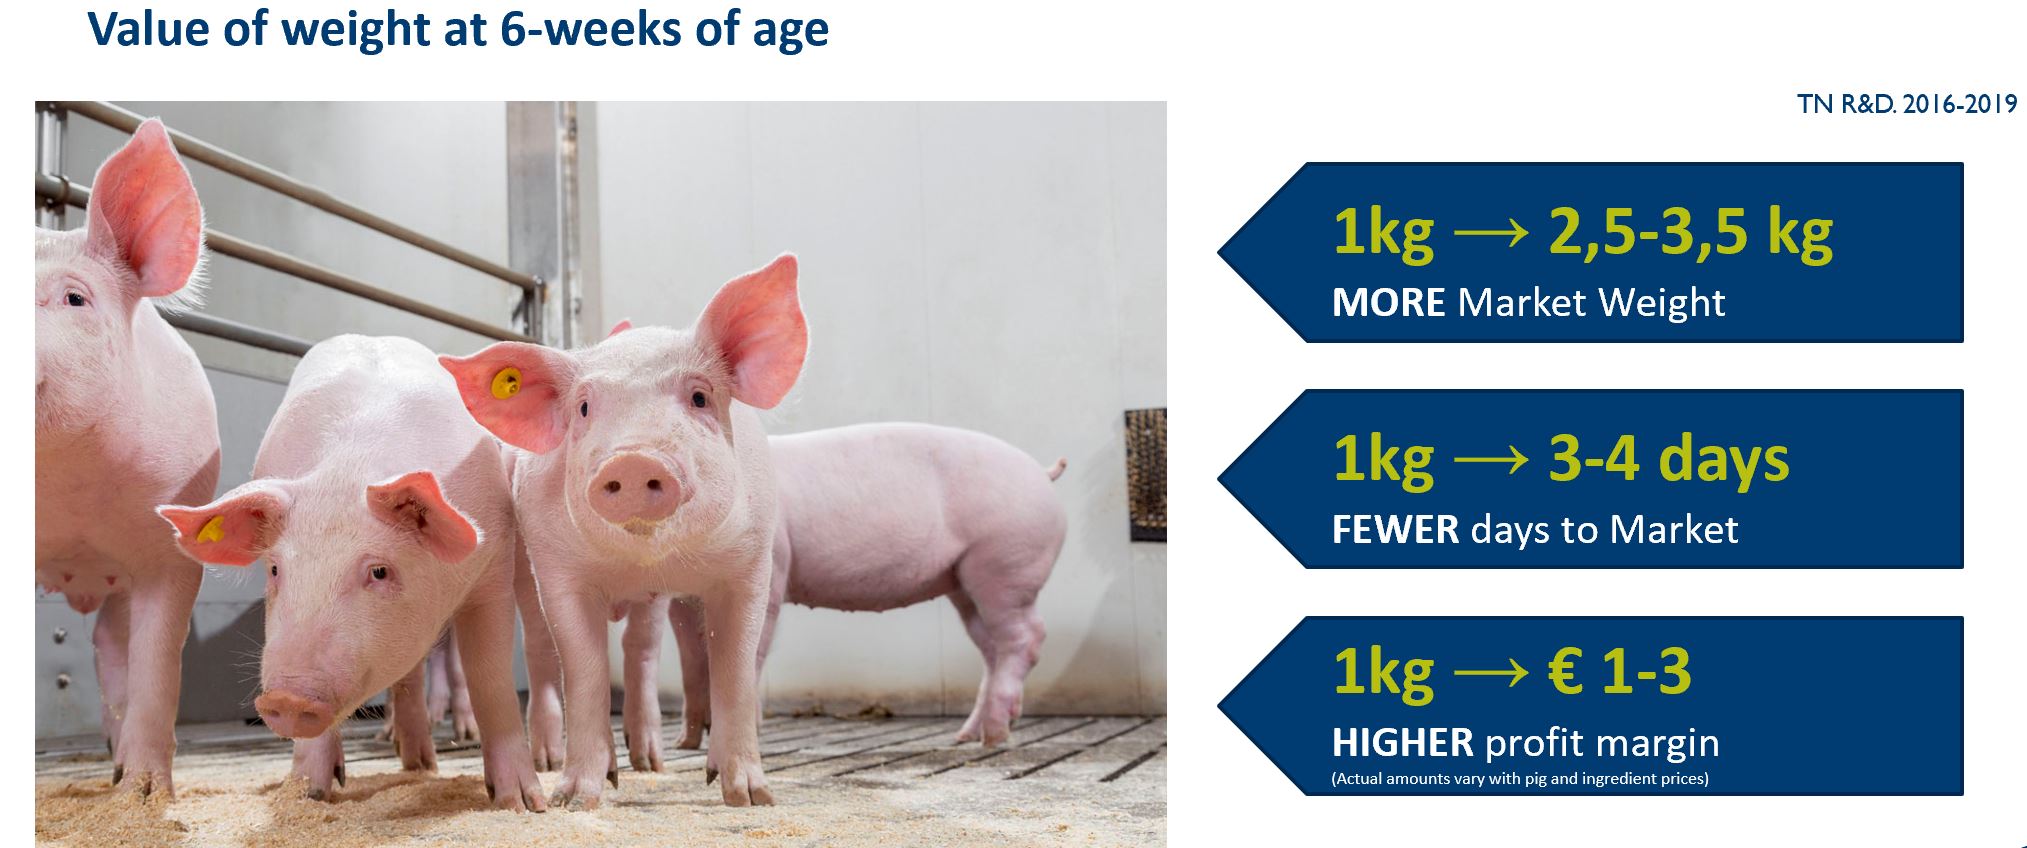 how many tasks do i need to do to age up a new born pig to fully grown